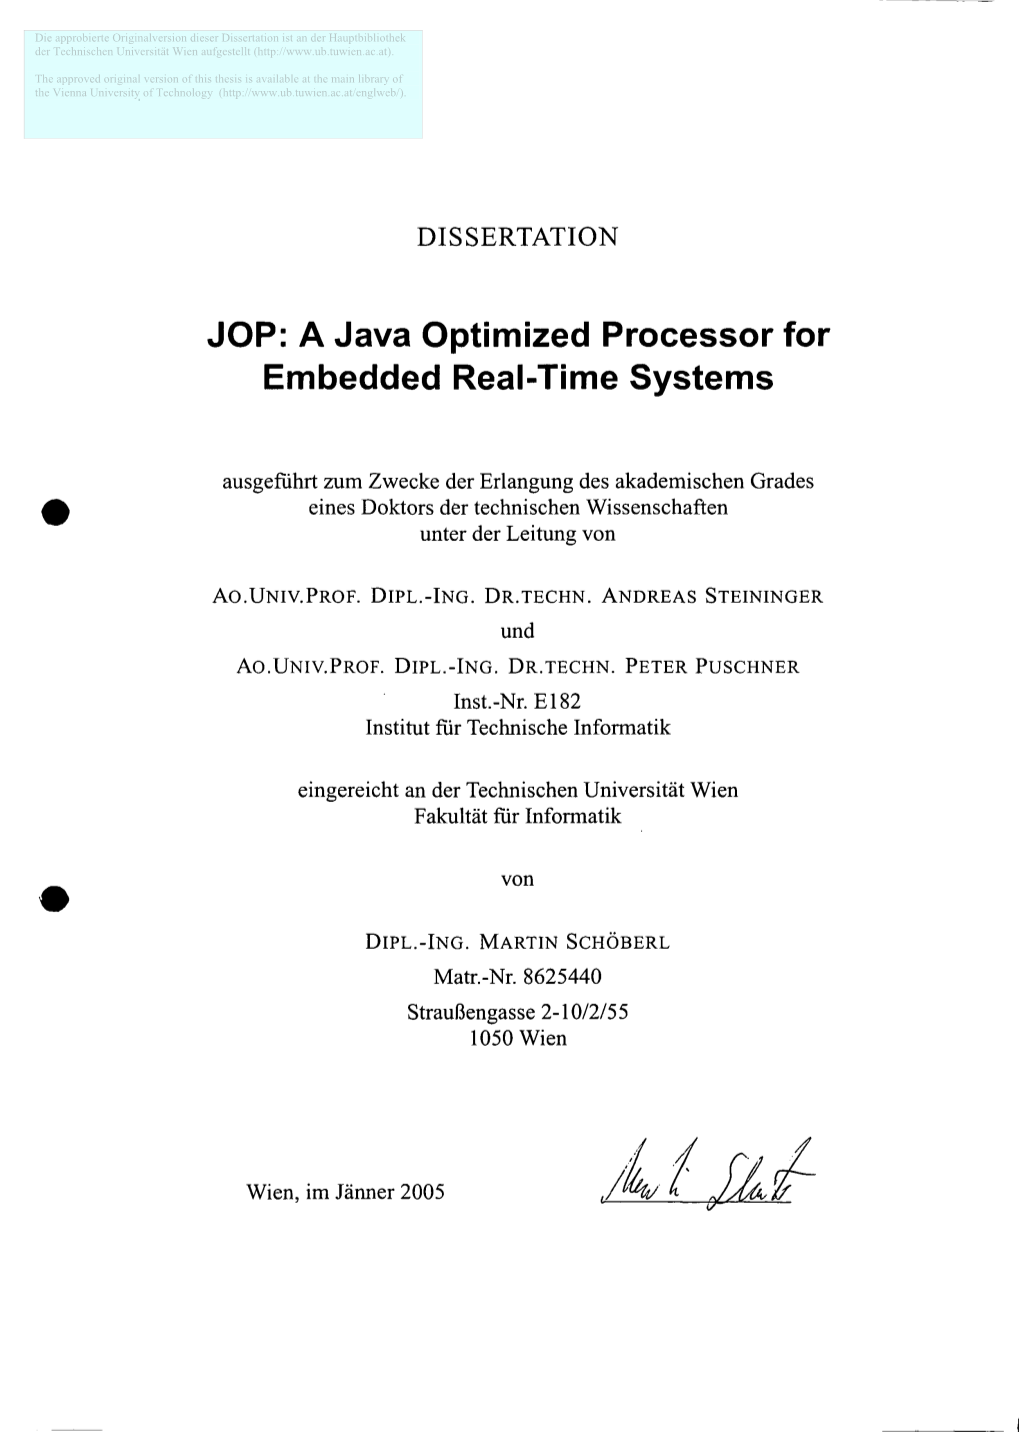 A Java Optimized Processor for Embedded Real-Time Systems